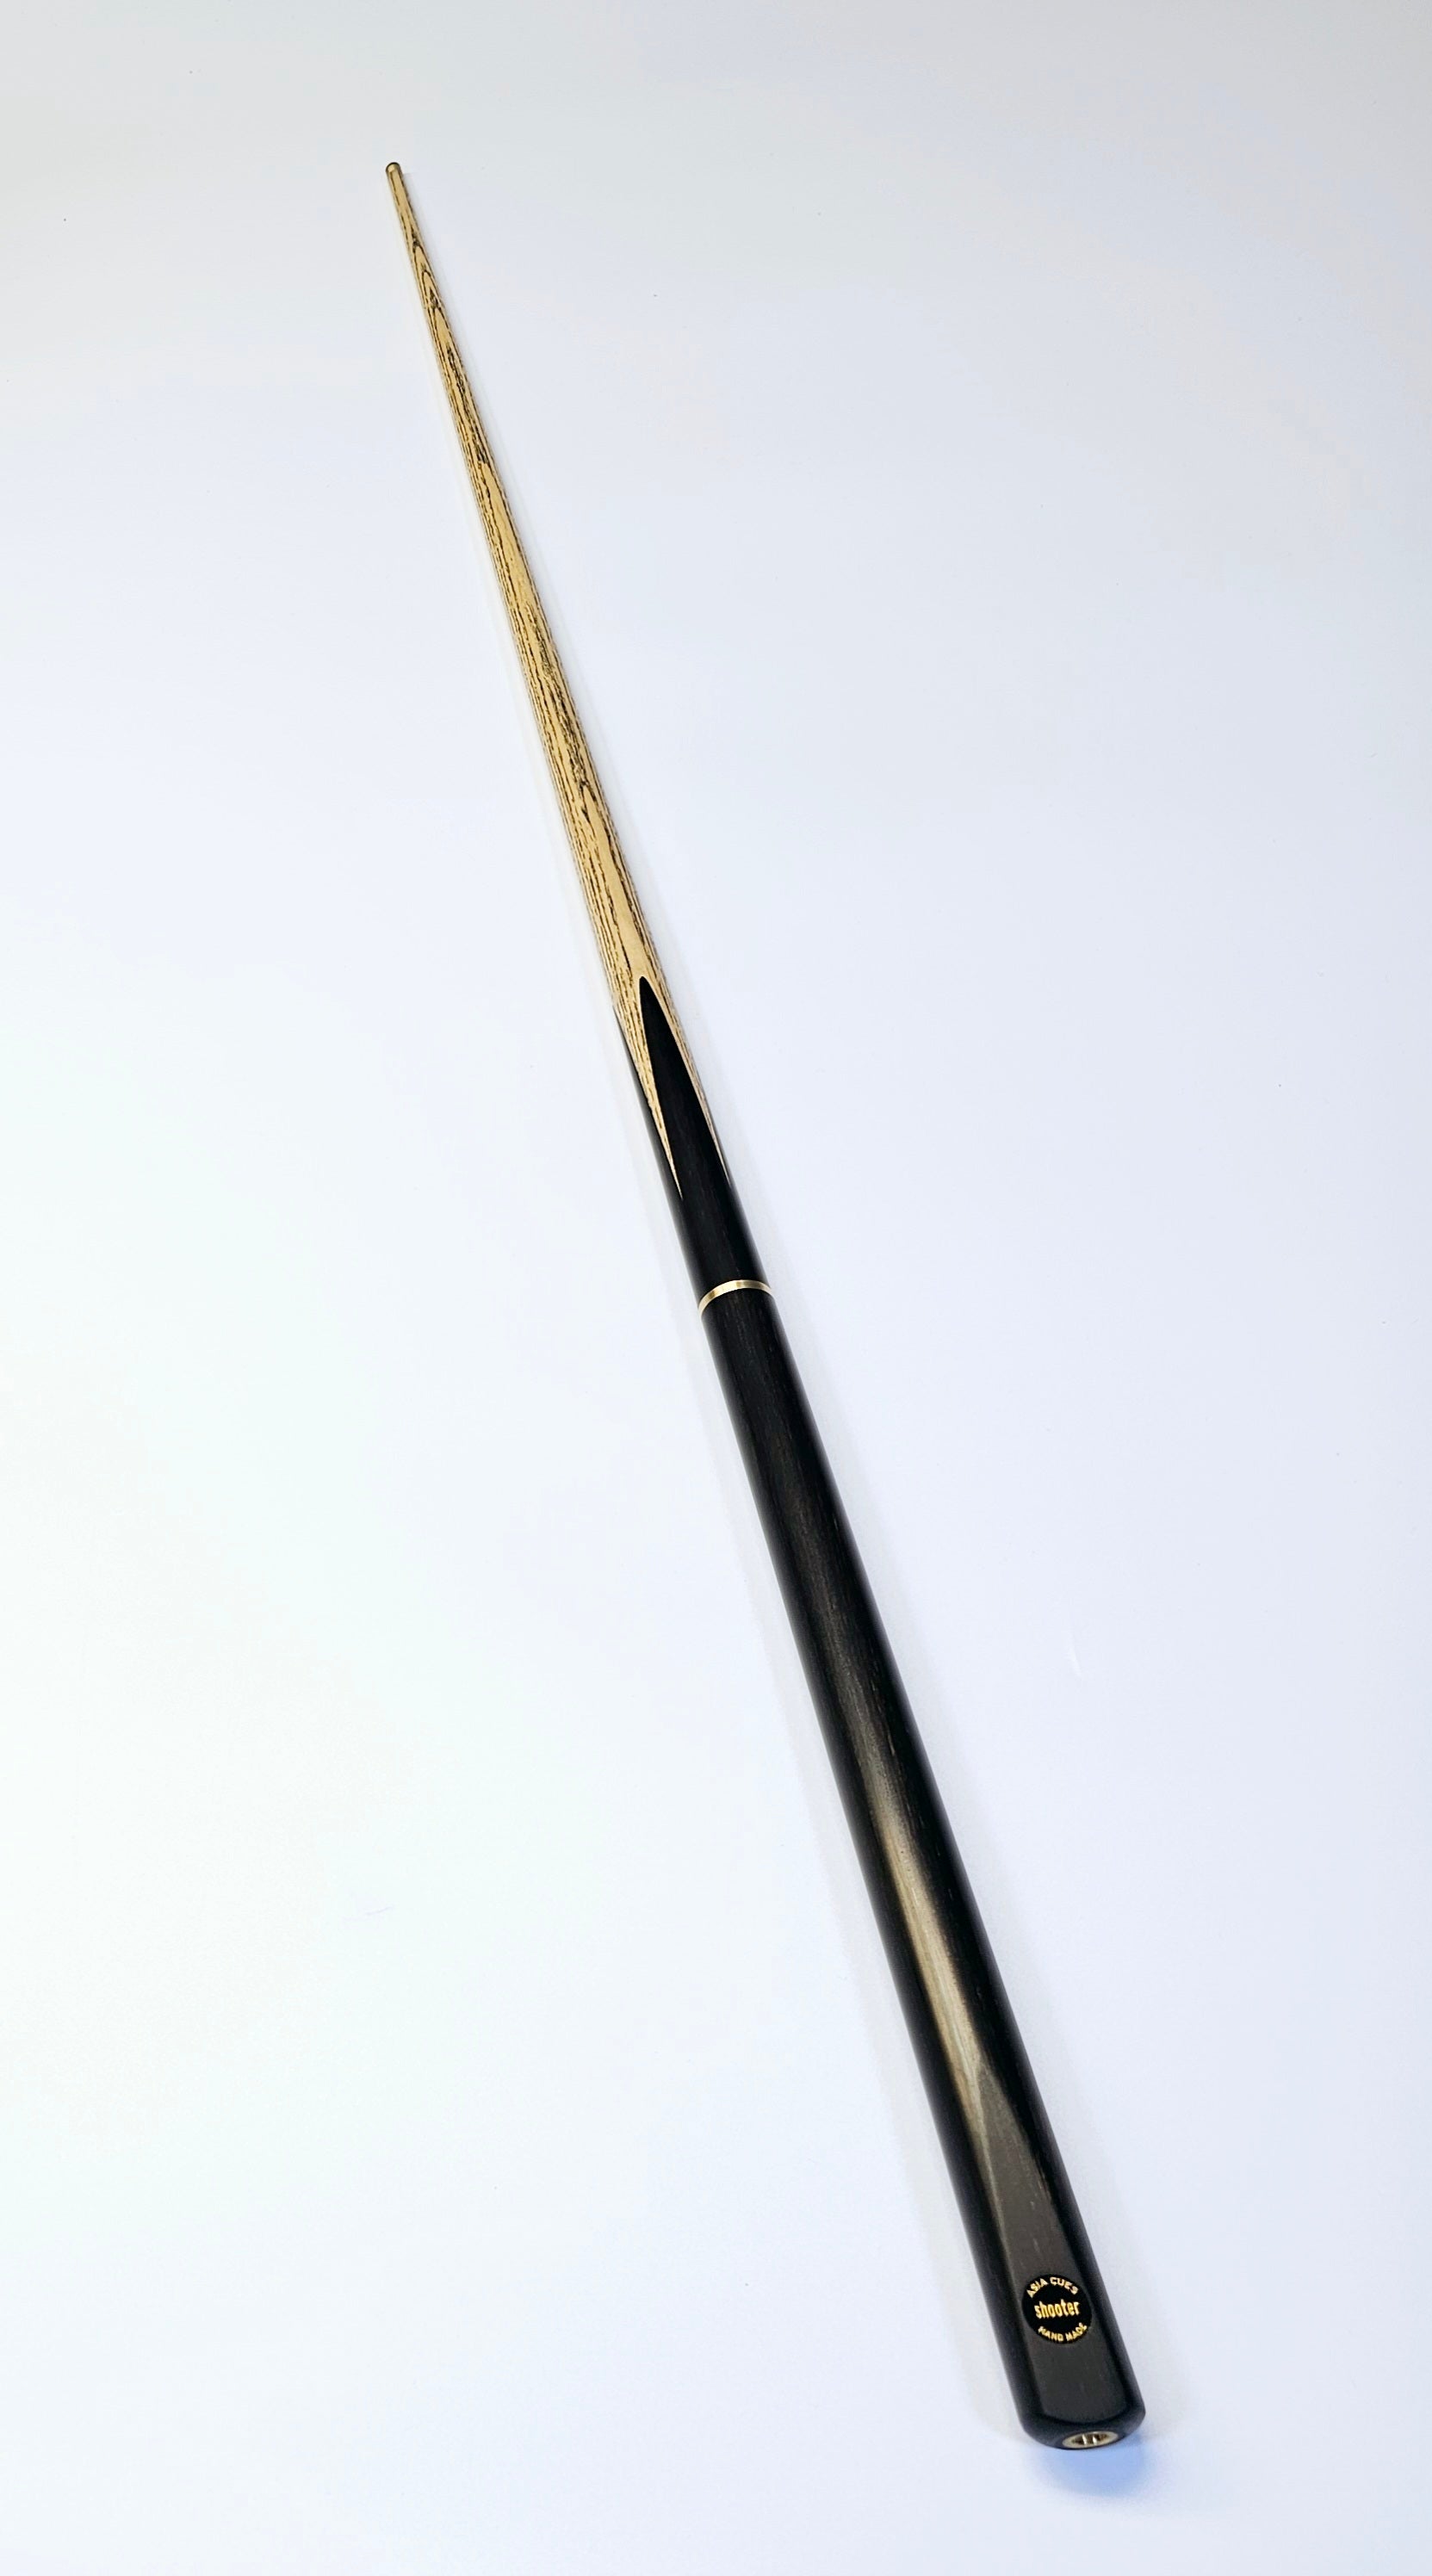 Asia Cues Shooter - 3/4 Jointed Junior Snooker Cue